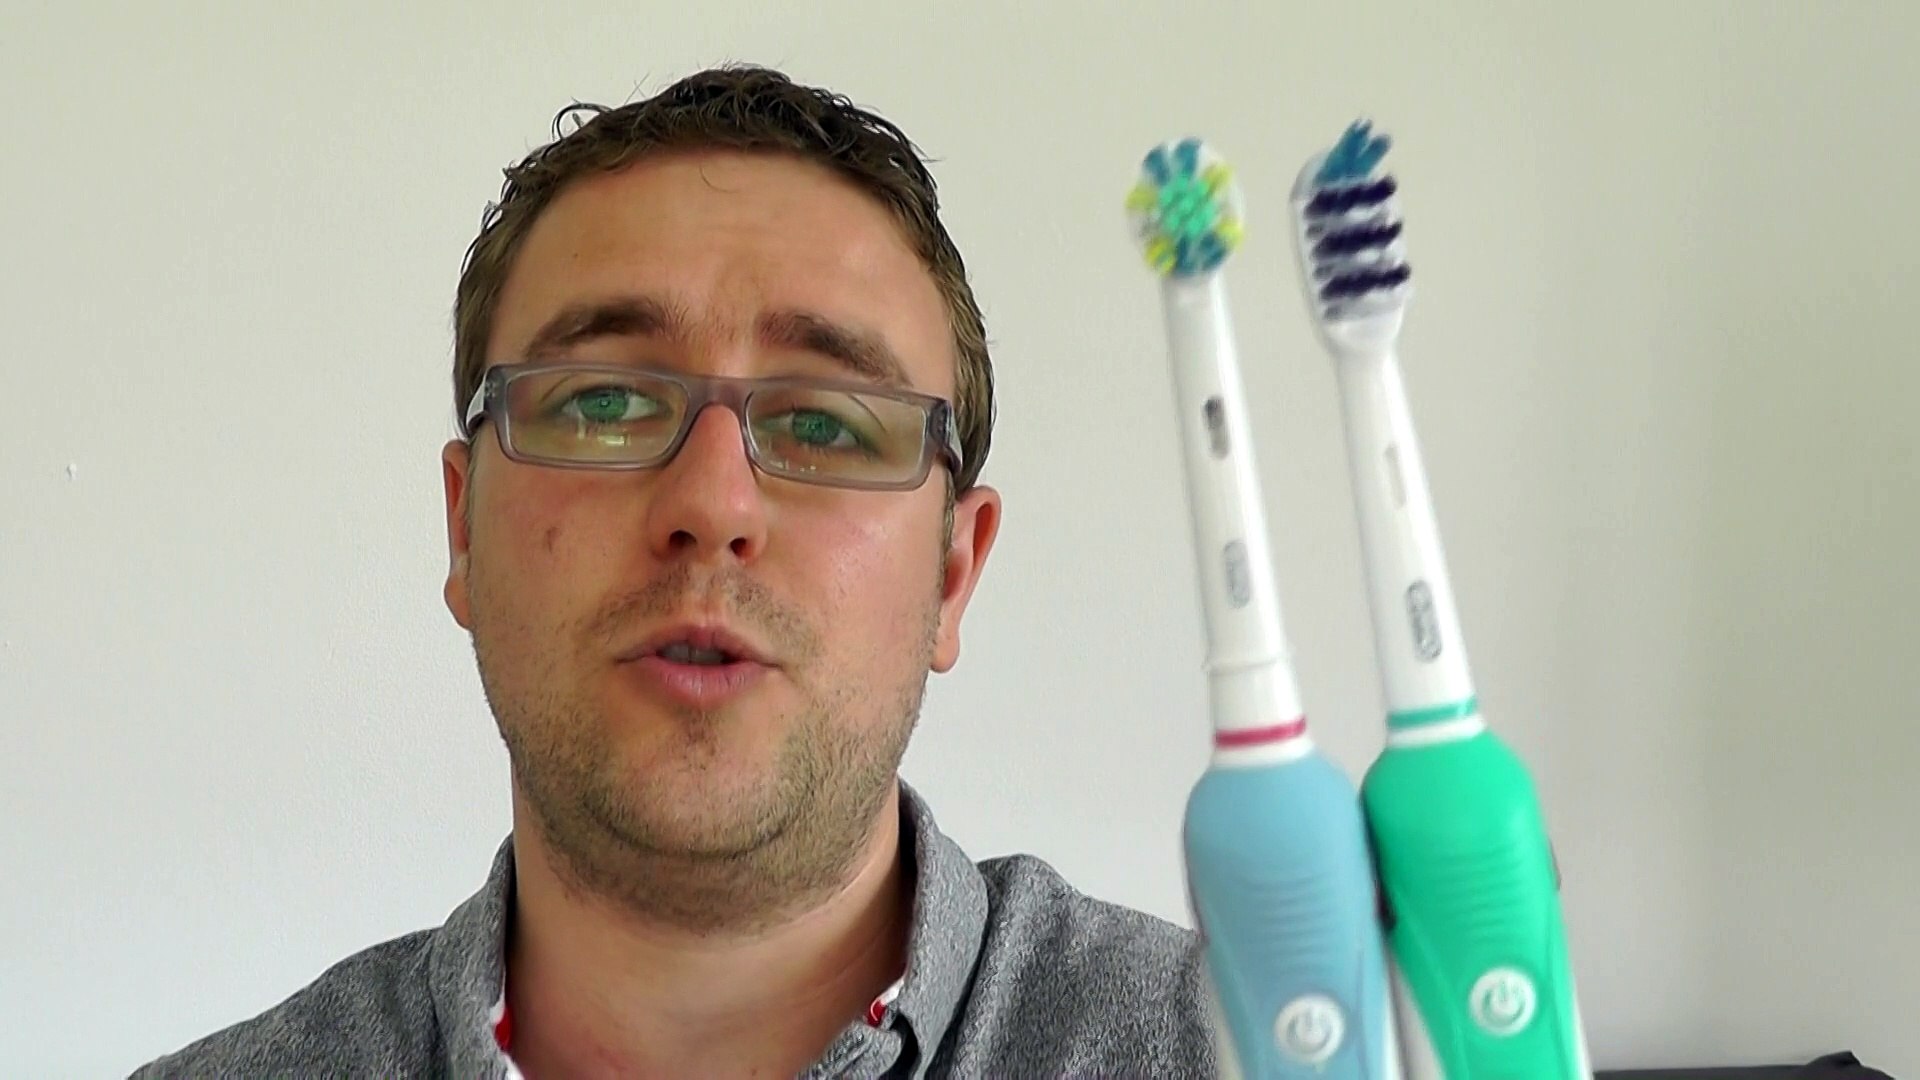 Oral-B Pro vs TriZone Series - What's The Difference? - video Dailymotion